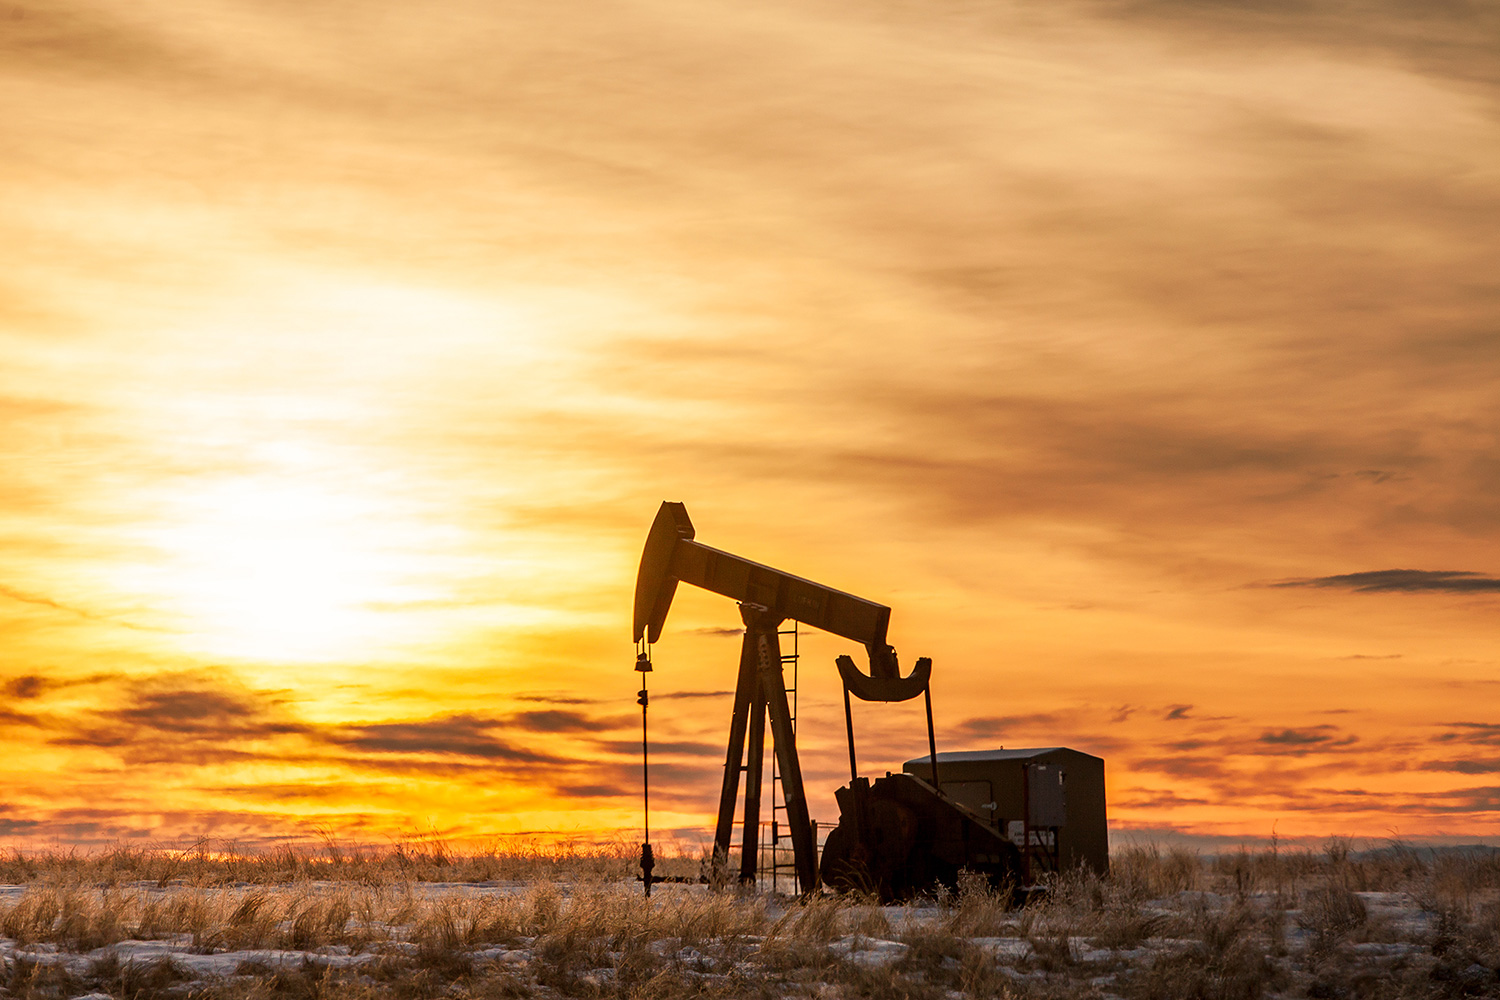 An oil pumpjack pumping petroleum against a brilliant sky south of Chinook, Montana.&nbsp;→ Buy a Print